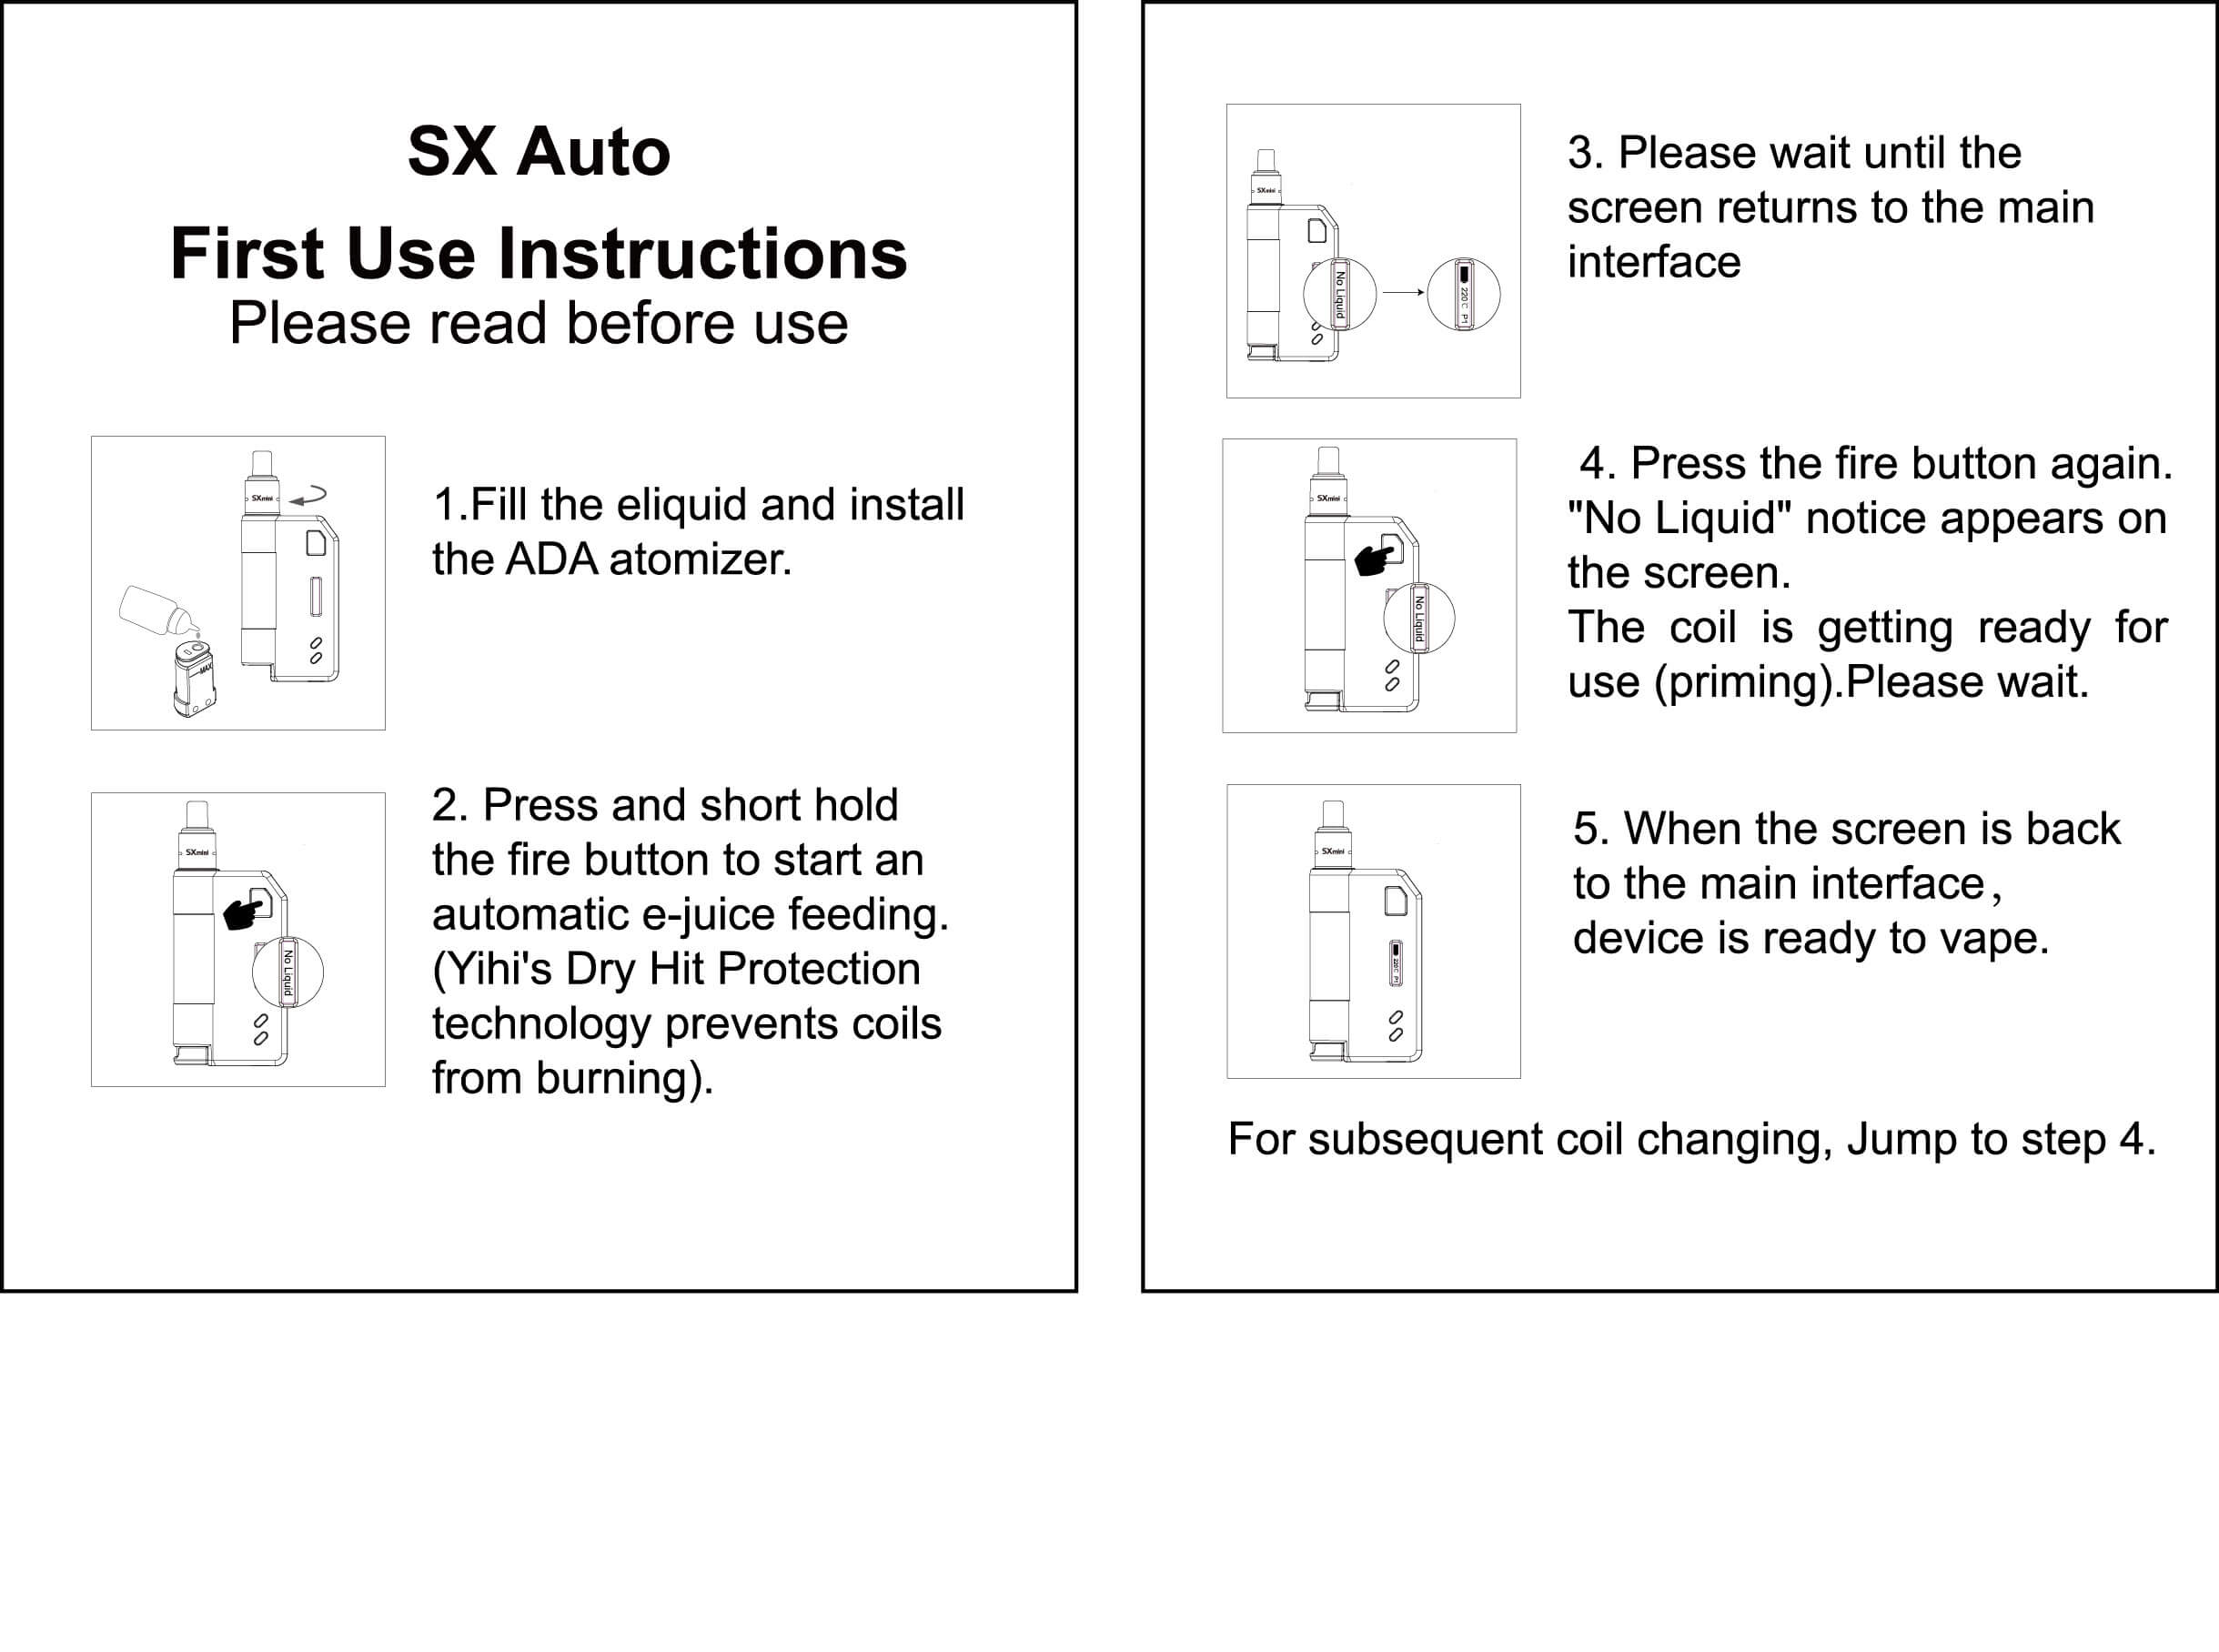 First use instructions of SX Auto.jpg